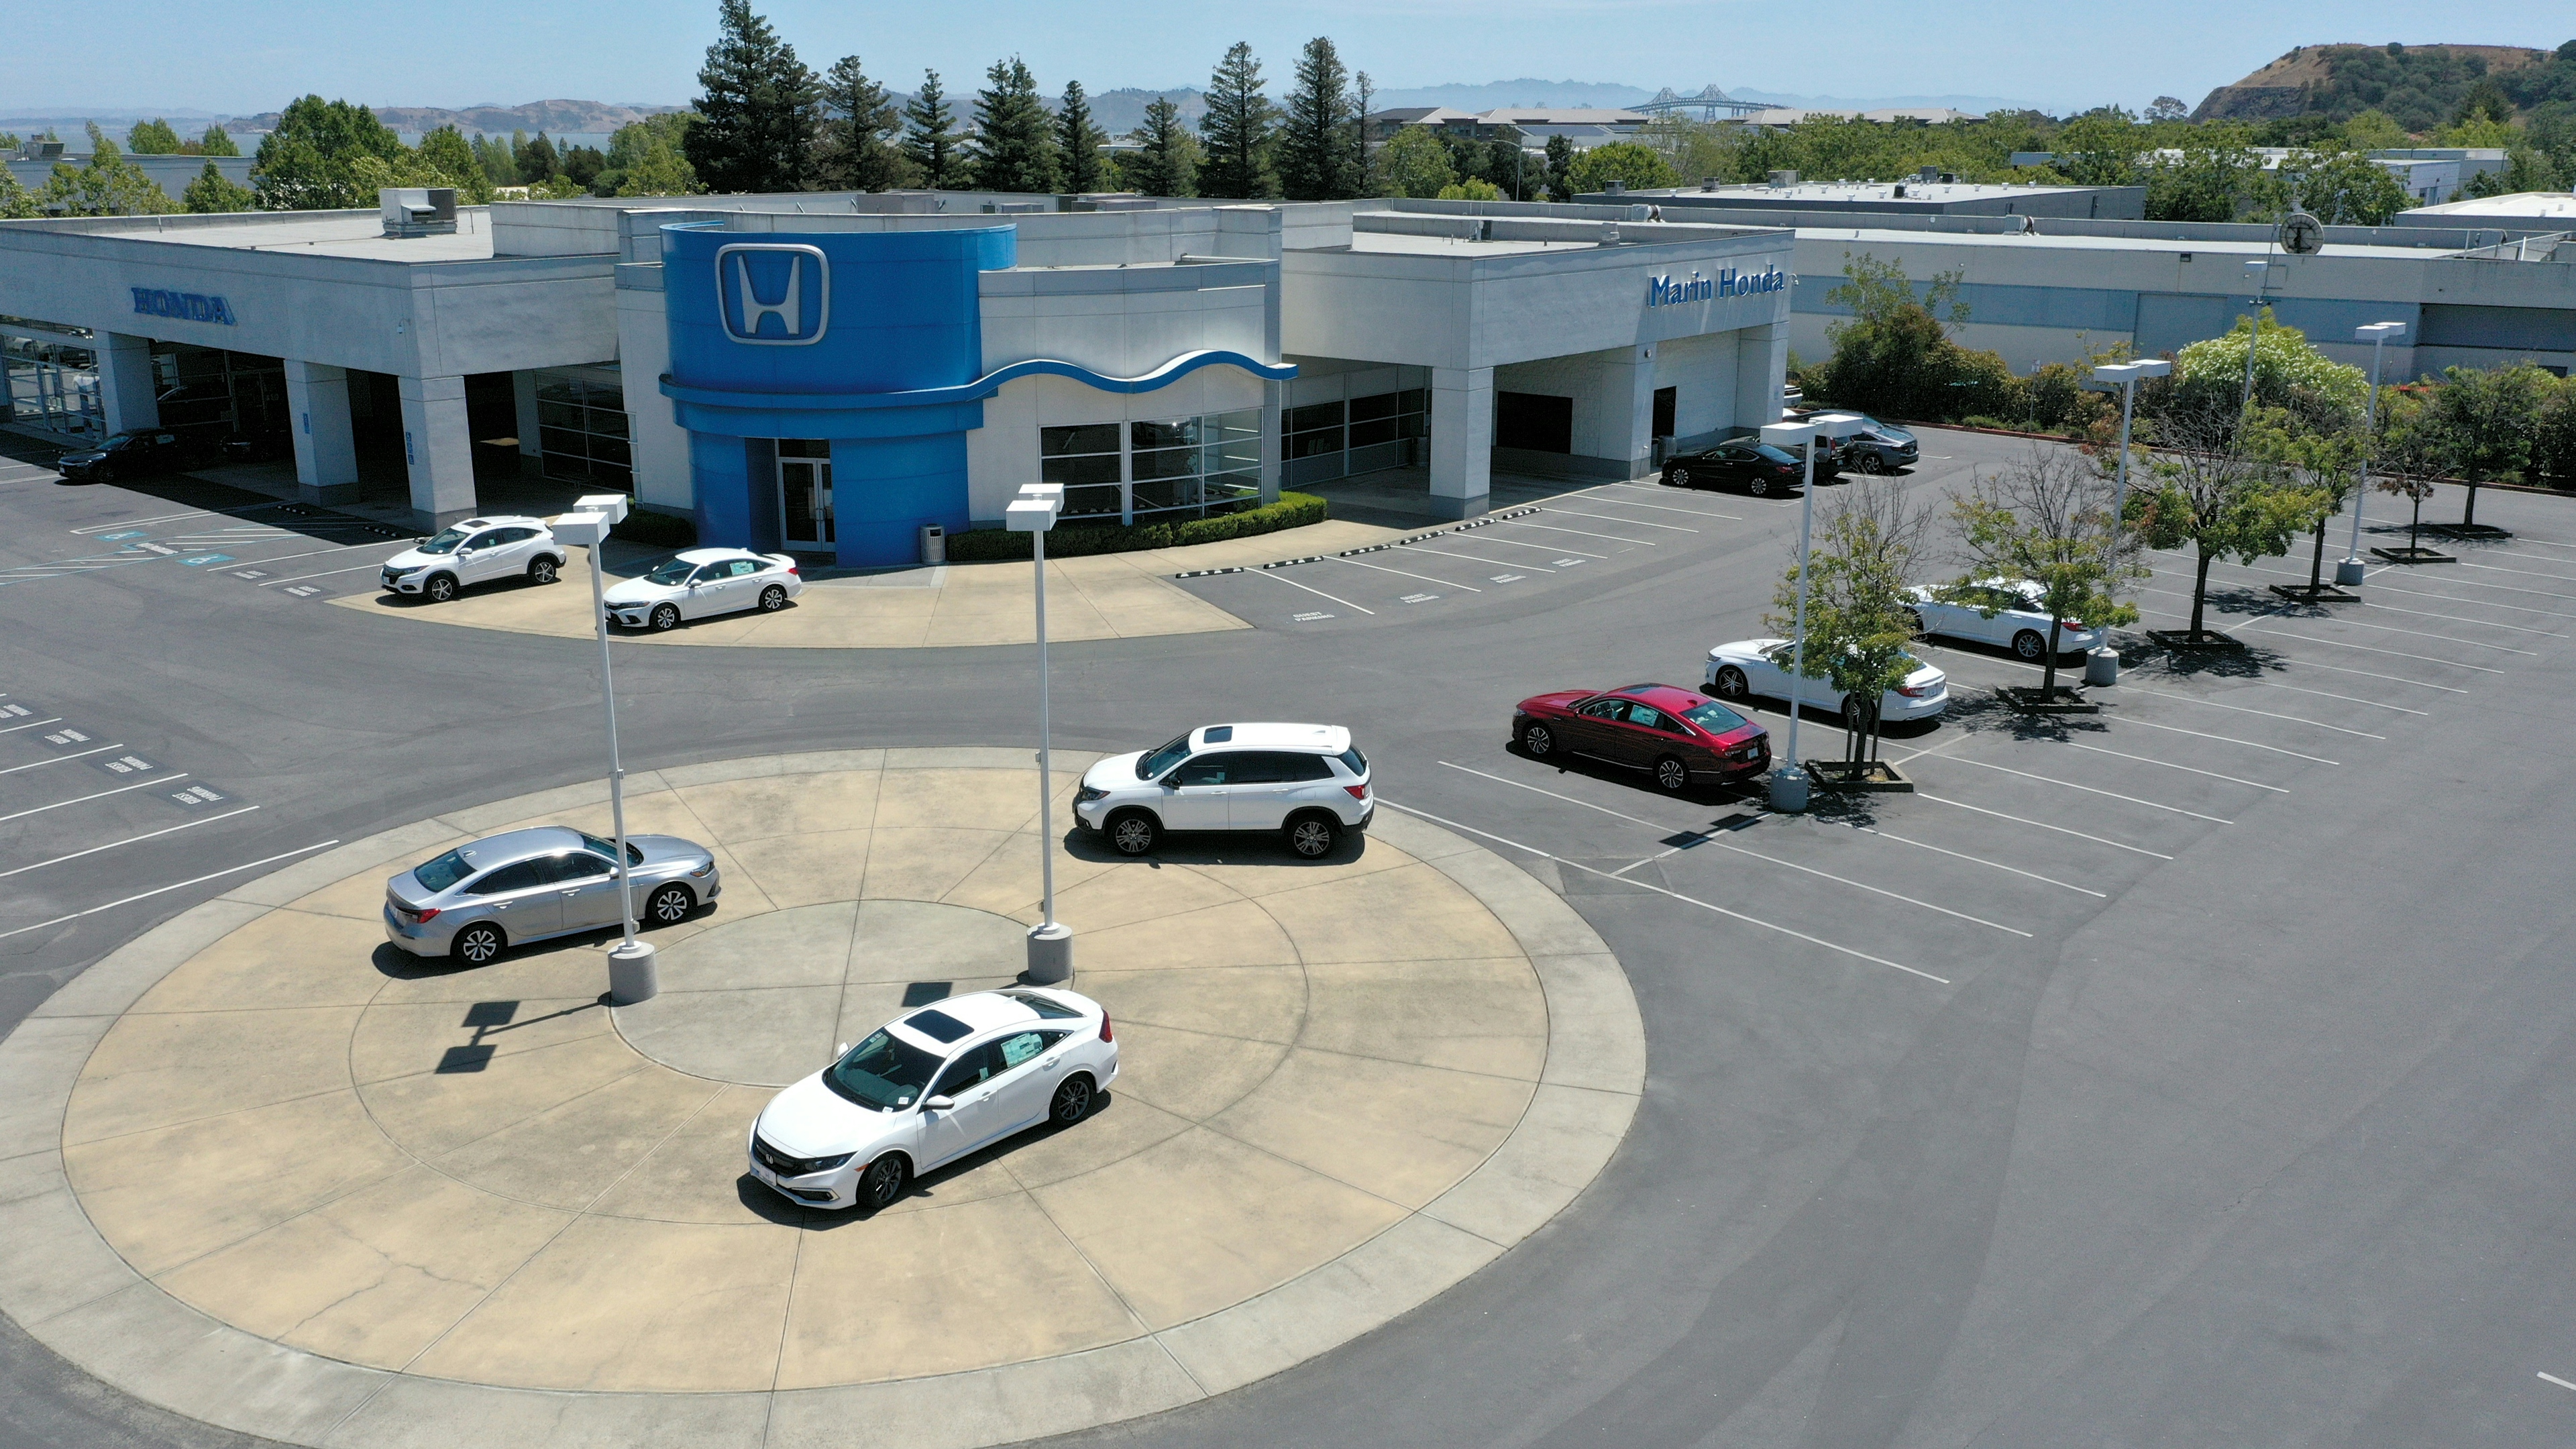 In an aerial view, the sales lot at Marin Honda is nearly empty